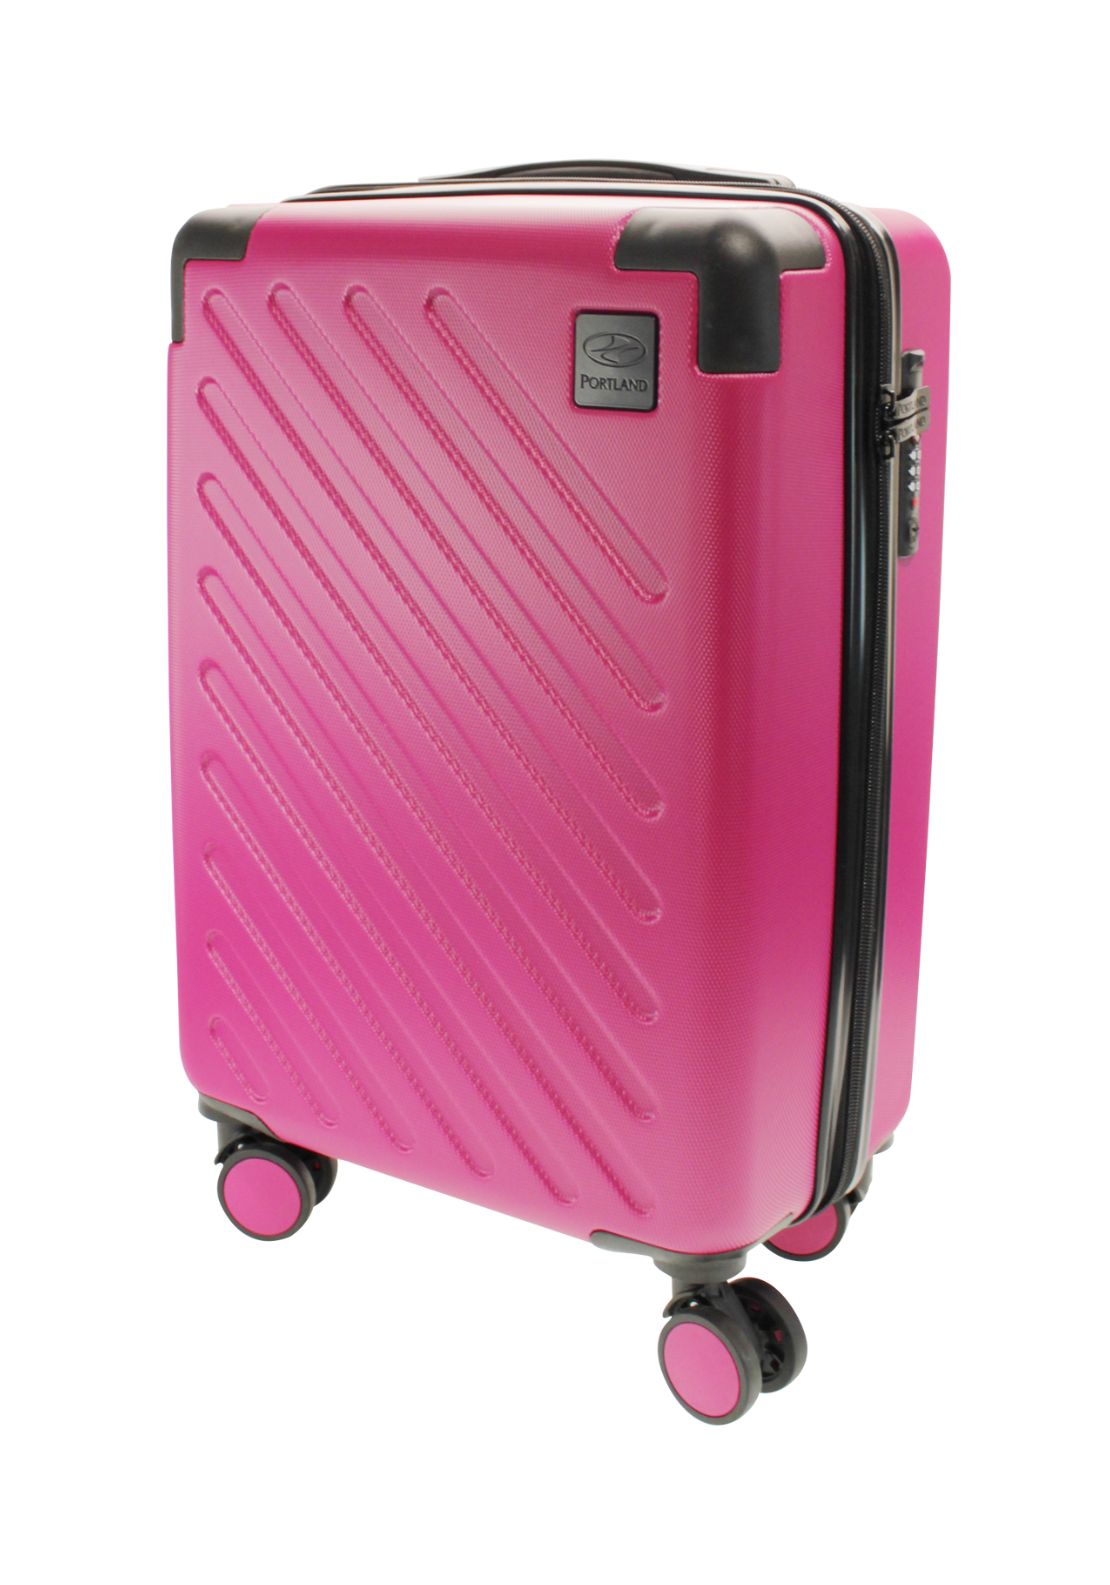 Portland Tokyo Hard Shell Cabin Luggage - Pink 2 Shaws Department Stores